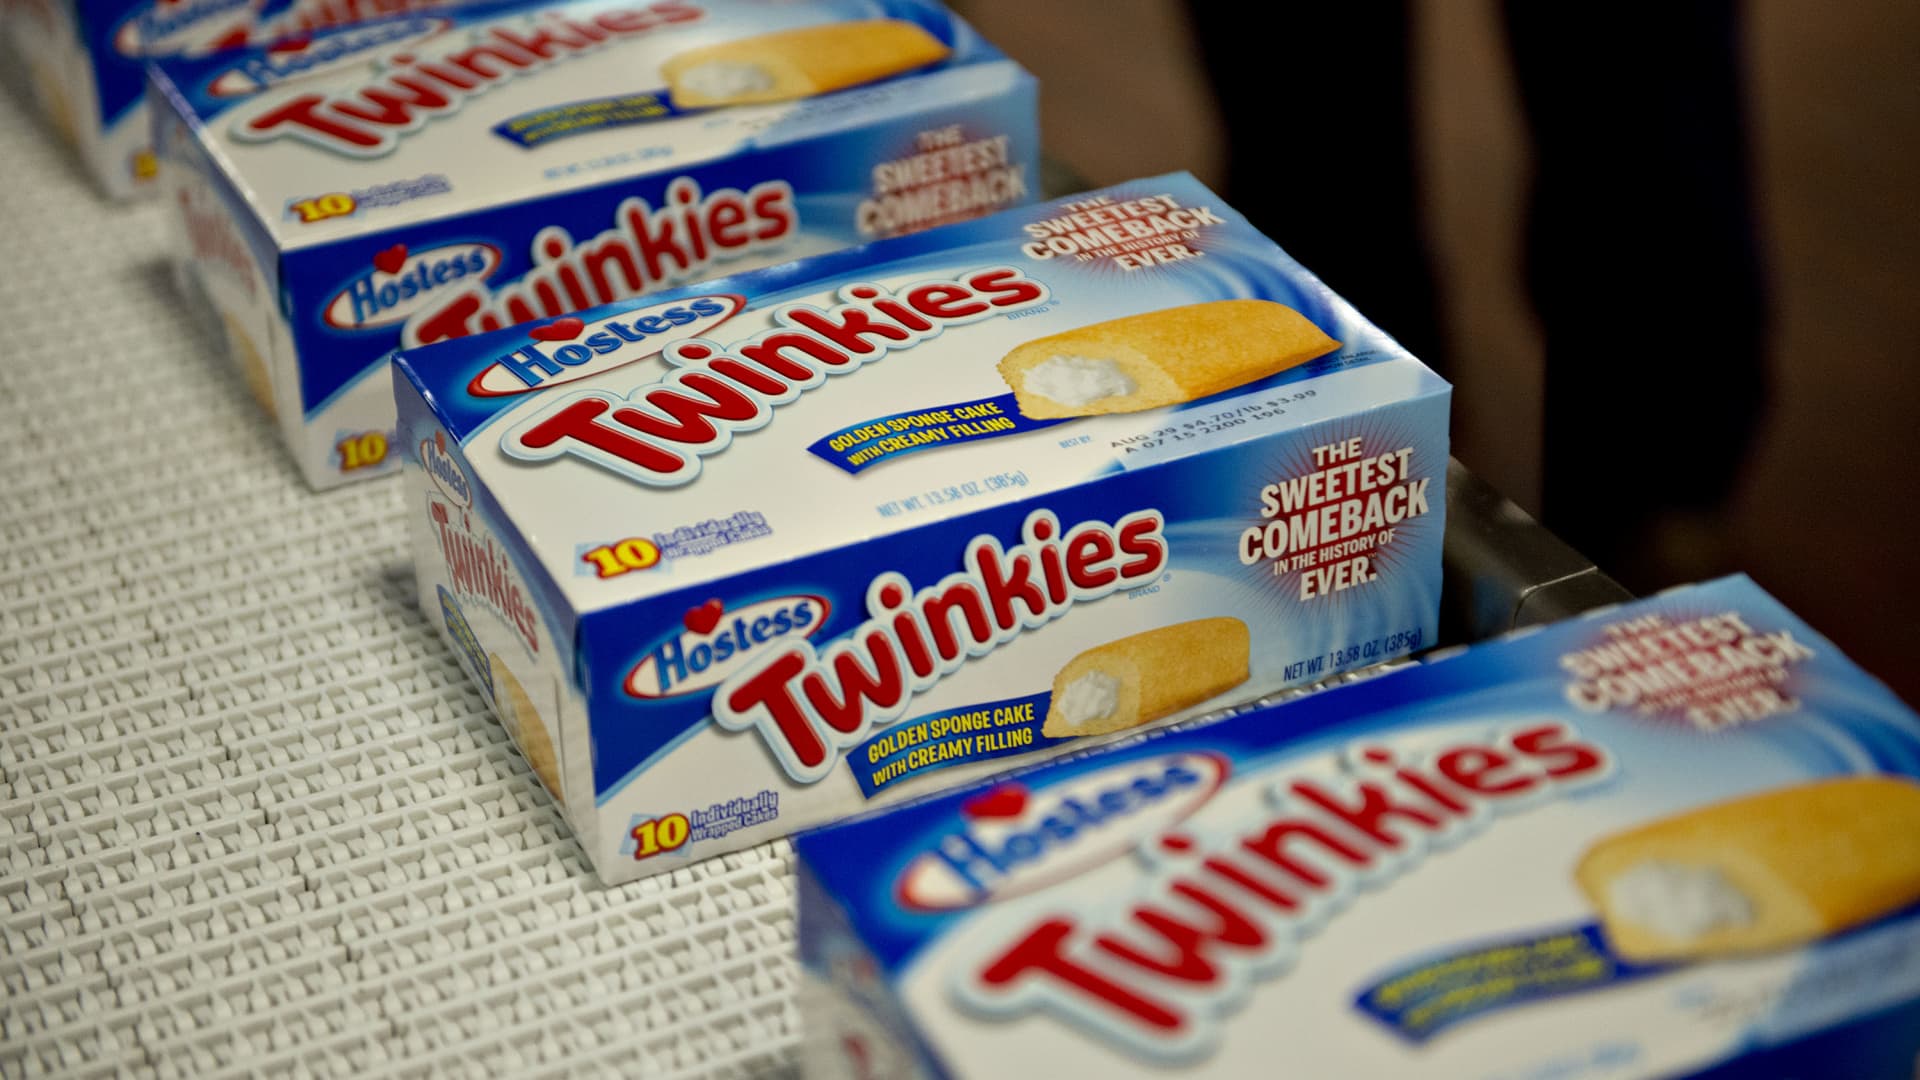 Bet against America’s love for junk food? Morgan Stanley sees tough times ahead for snack stocks like Hostess